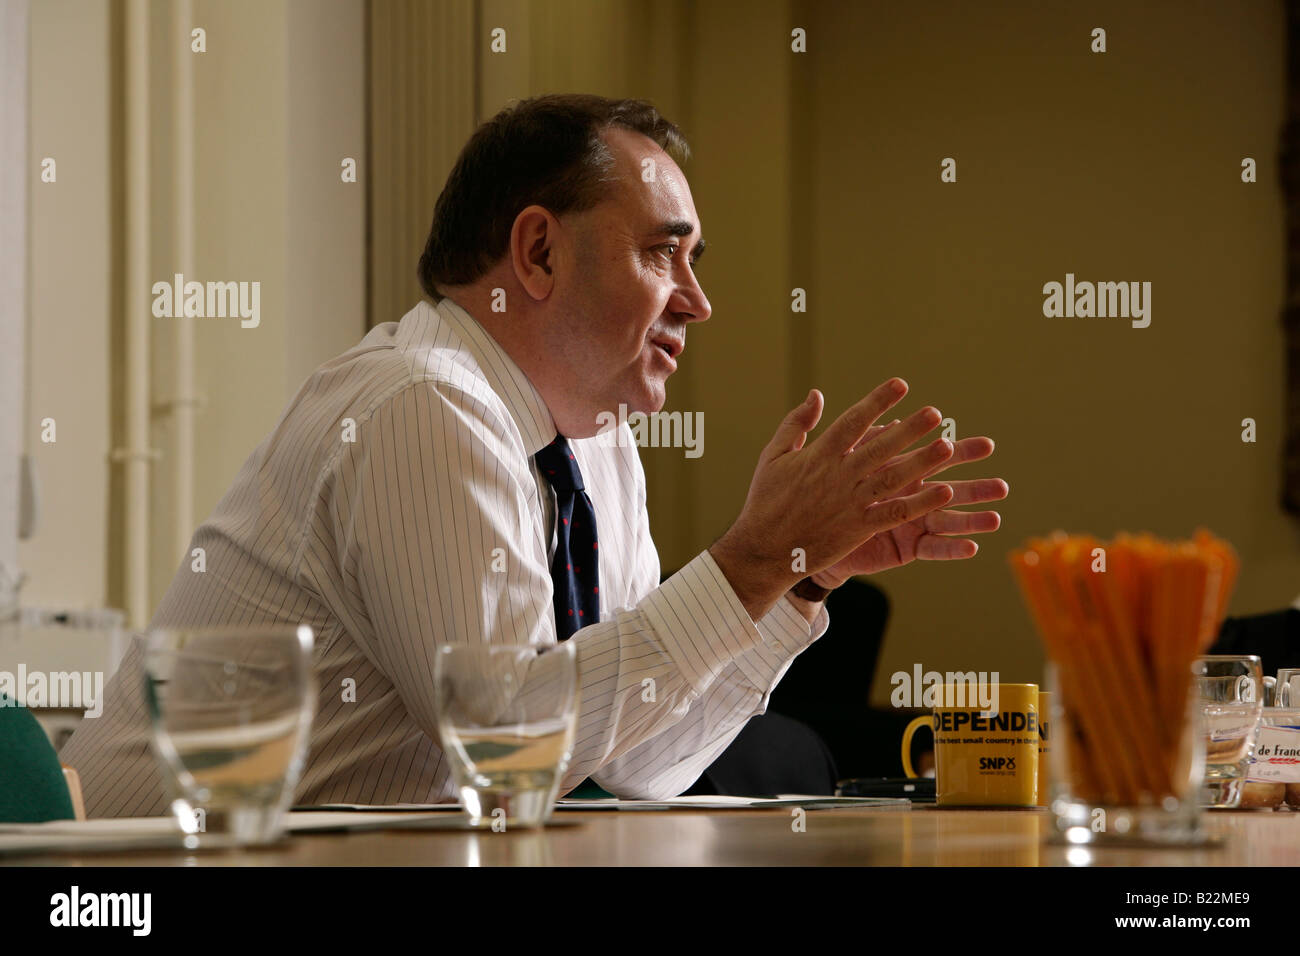 Scotland's First Minister Alex Salmond, MSP and SNP party leader. Stock Photo